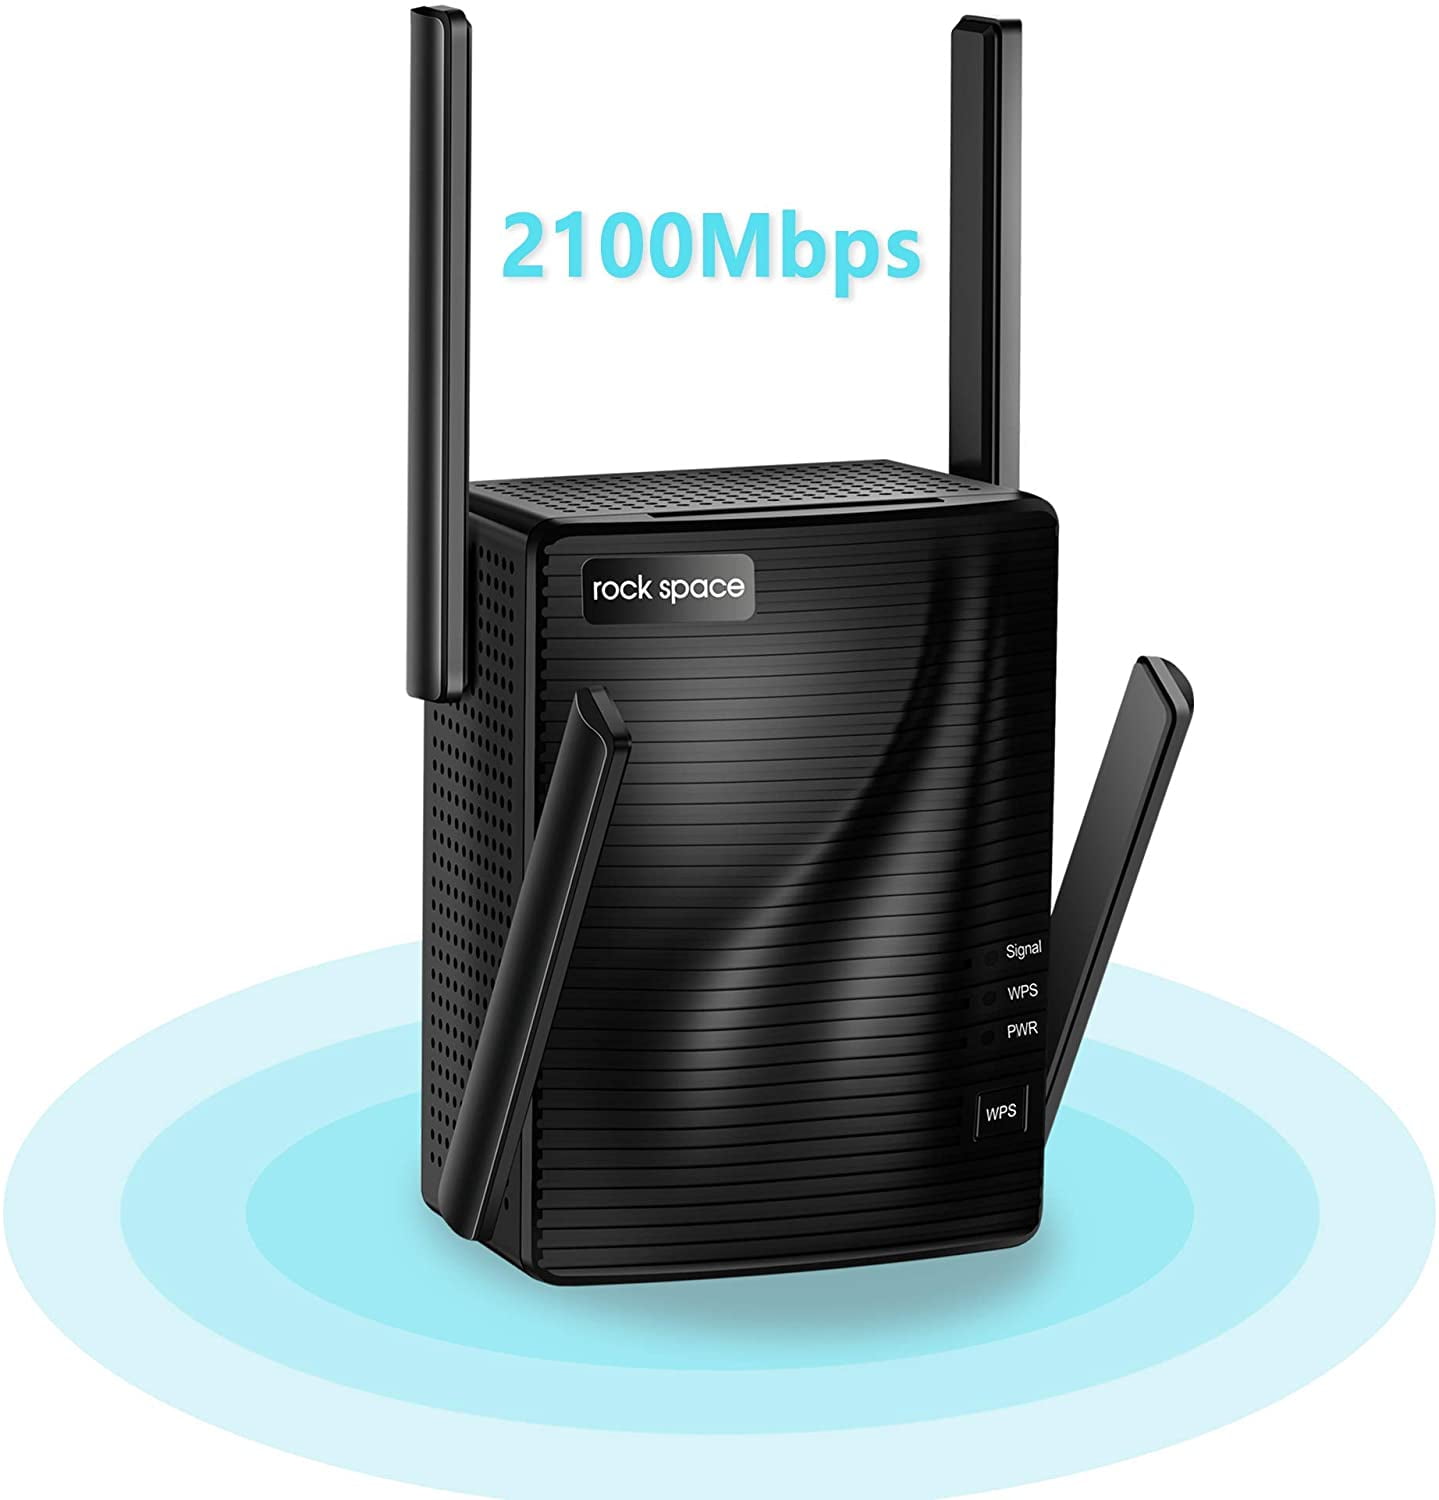 2100 Mbps WiFi Range Extender - rockspace WiFi Repeater, AC2100 WiFi Booster, Signal Booster for Home, Gigabit Port, 360° Coverage, Extends WiFi Range - Walmart.com